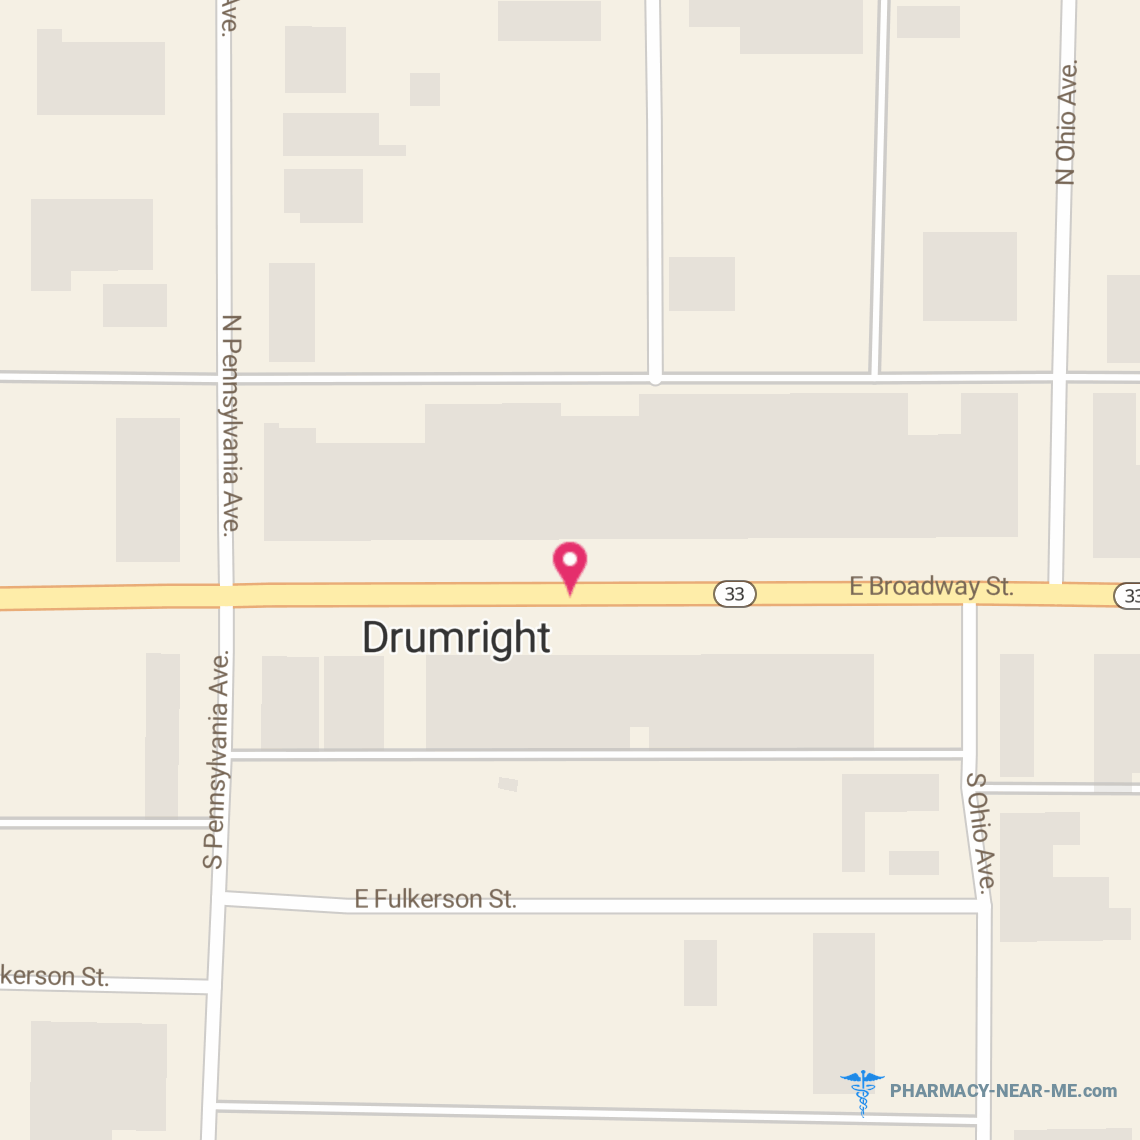 MURPHYS DRUG - Pharmacy Hours, Phone, Reviews & Information: 145 East Broadway Street, Drumright, Oklahoma 74030, United States